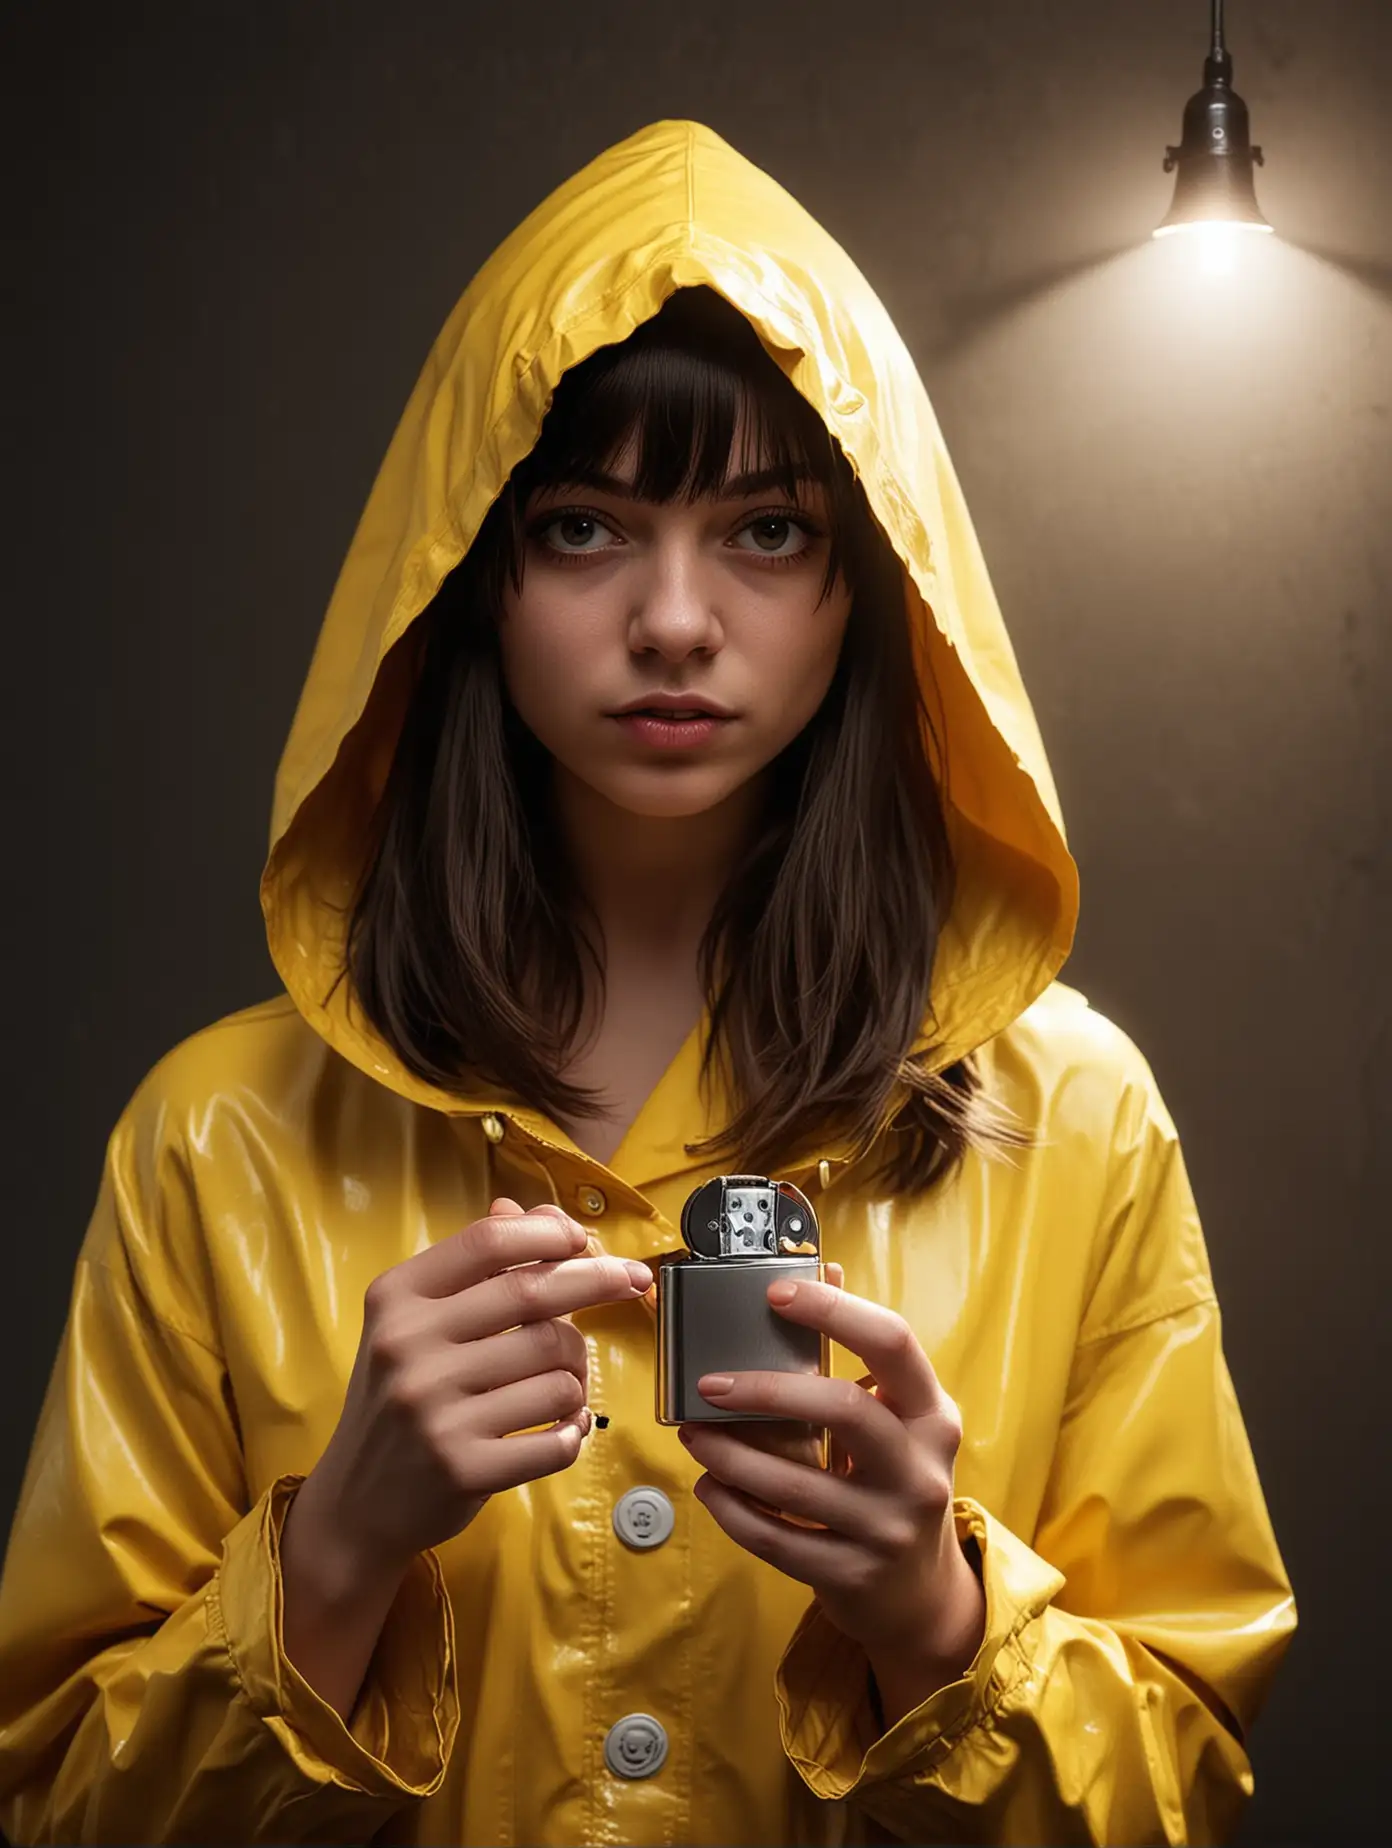 Teenage Girl in Yellow Raincoat with Zippo Lighter Inspired by Little Nightmares